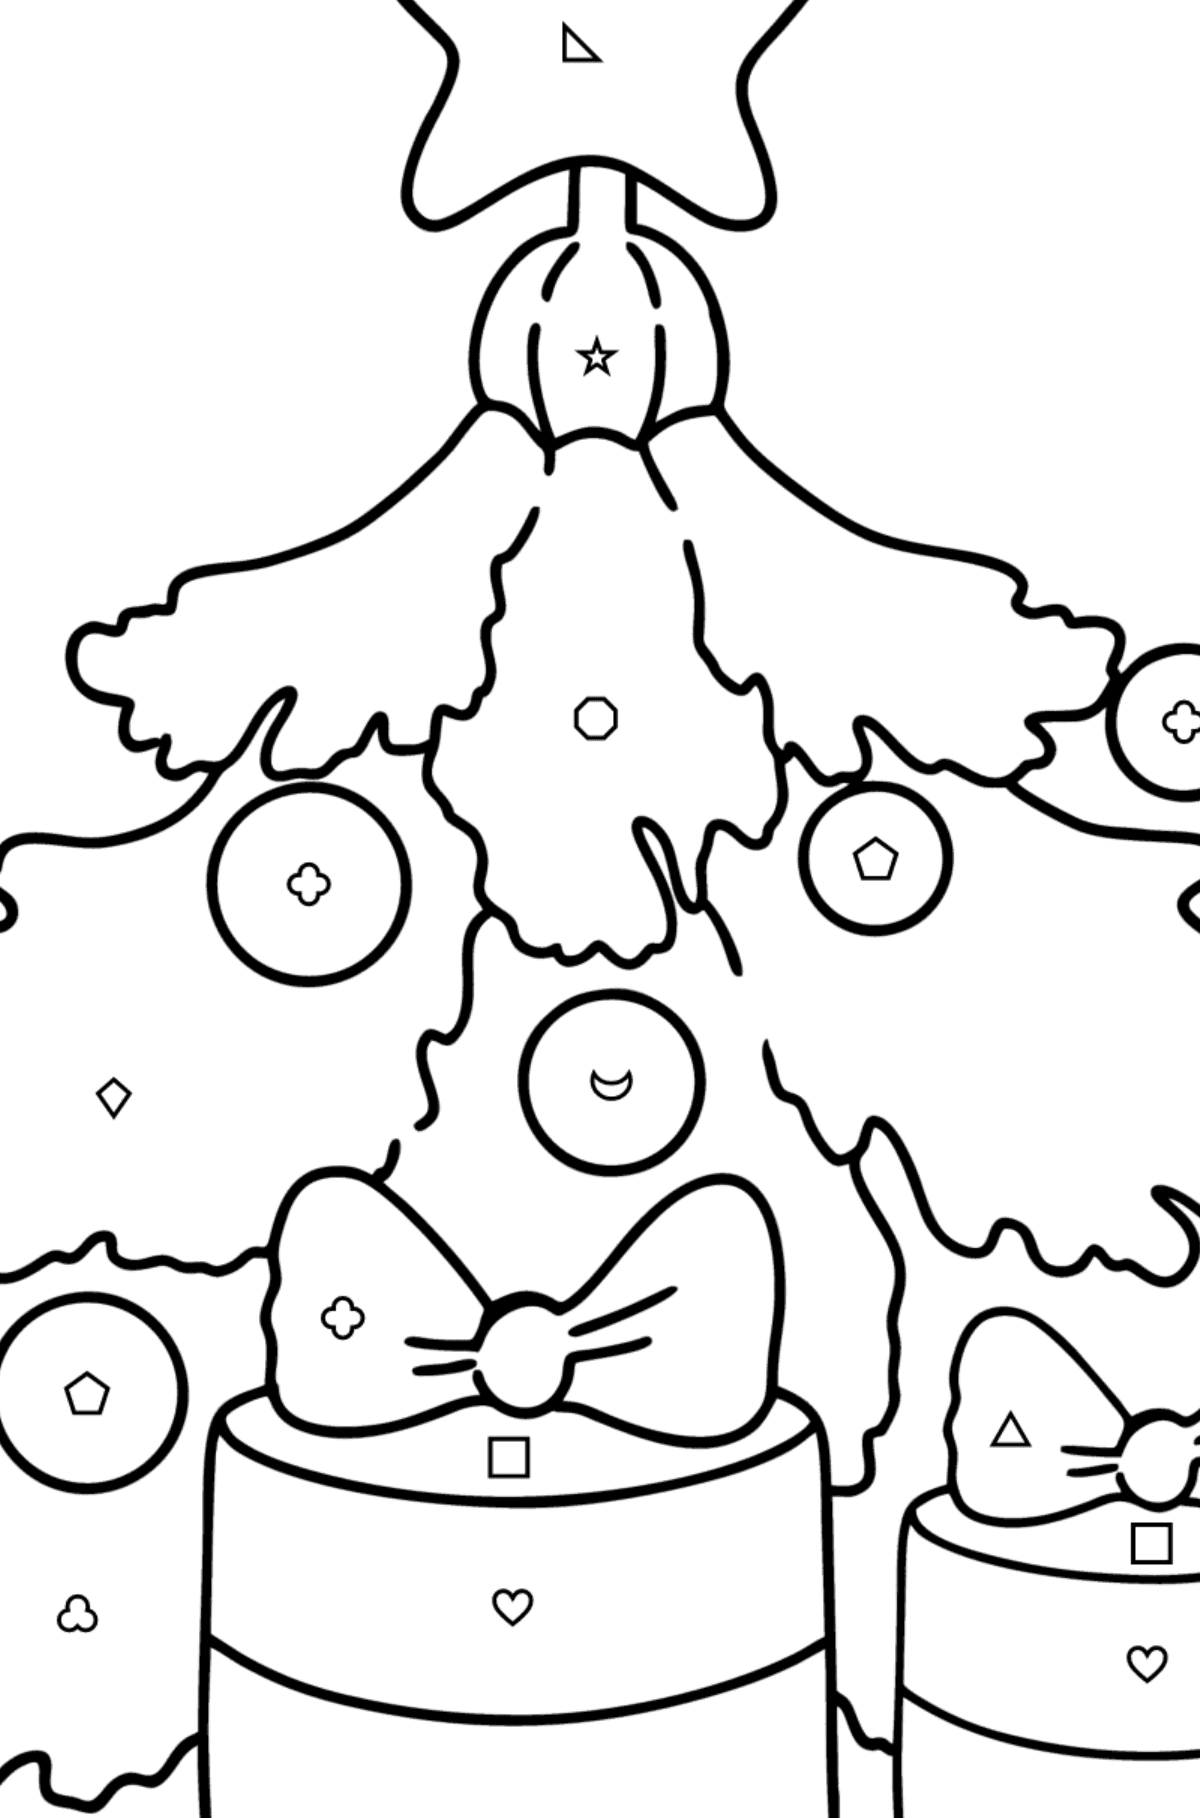 Christmas Tree and Gifts coloring page - Coloring by Geometric Shapes for Kids